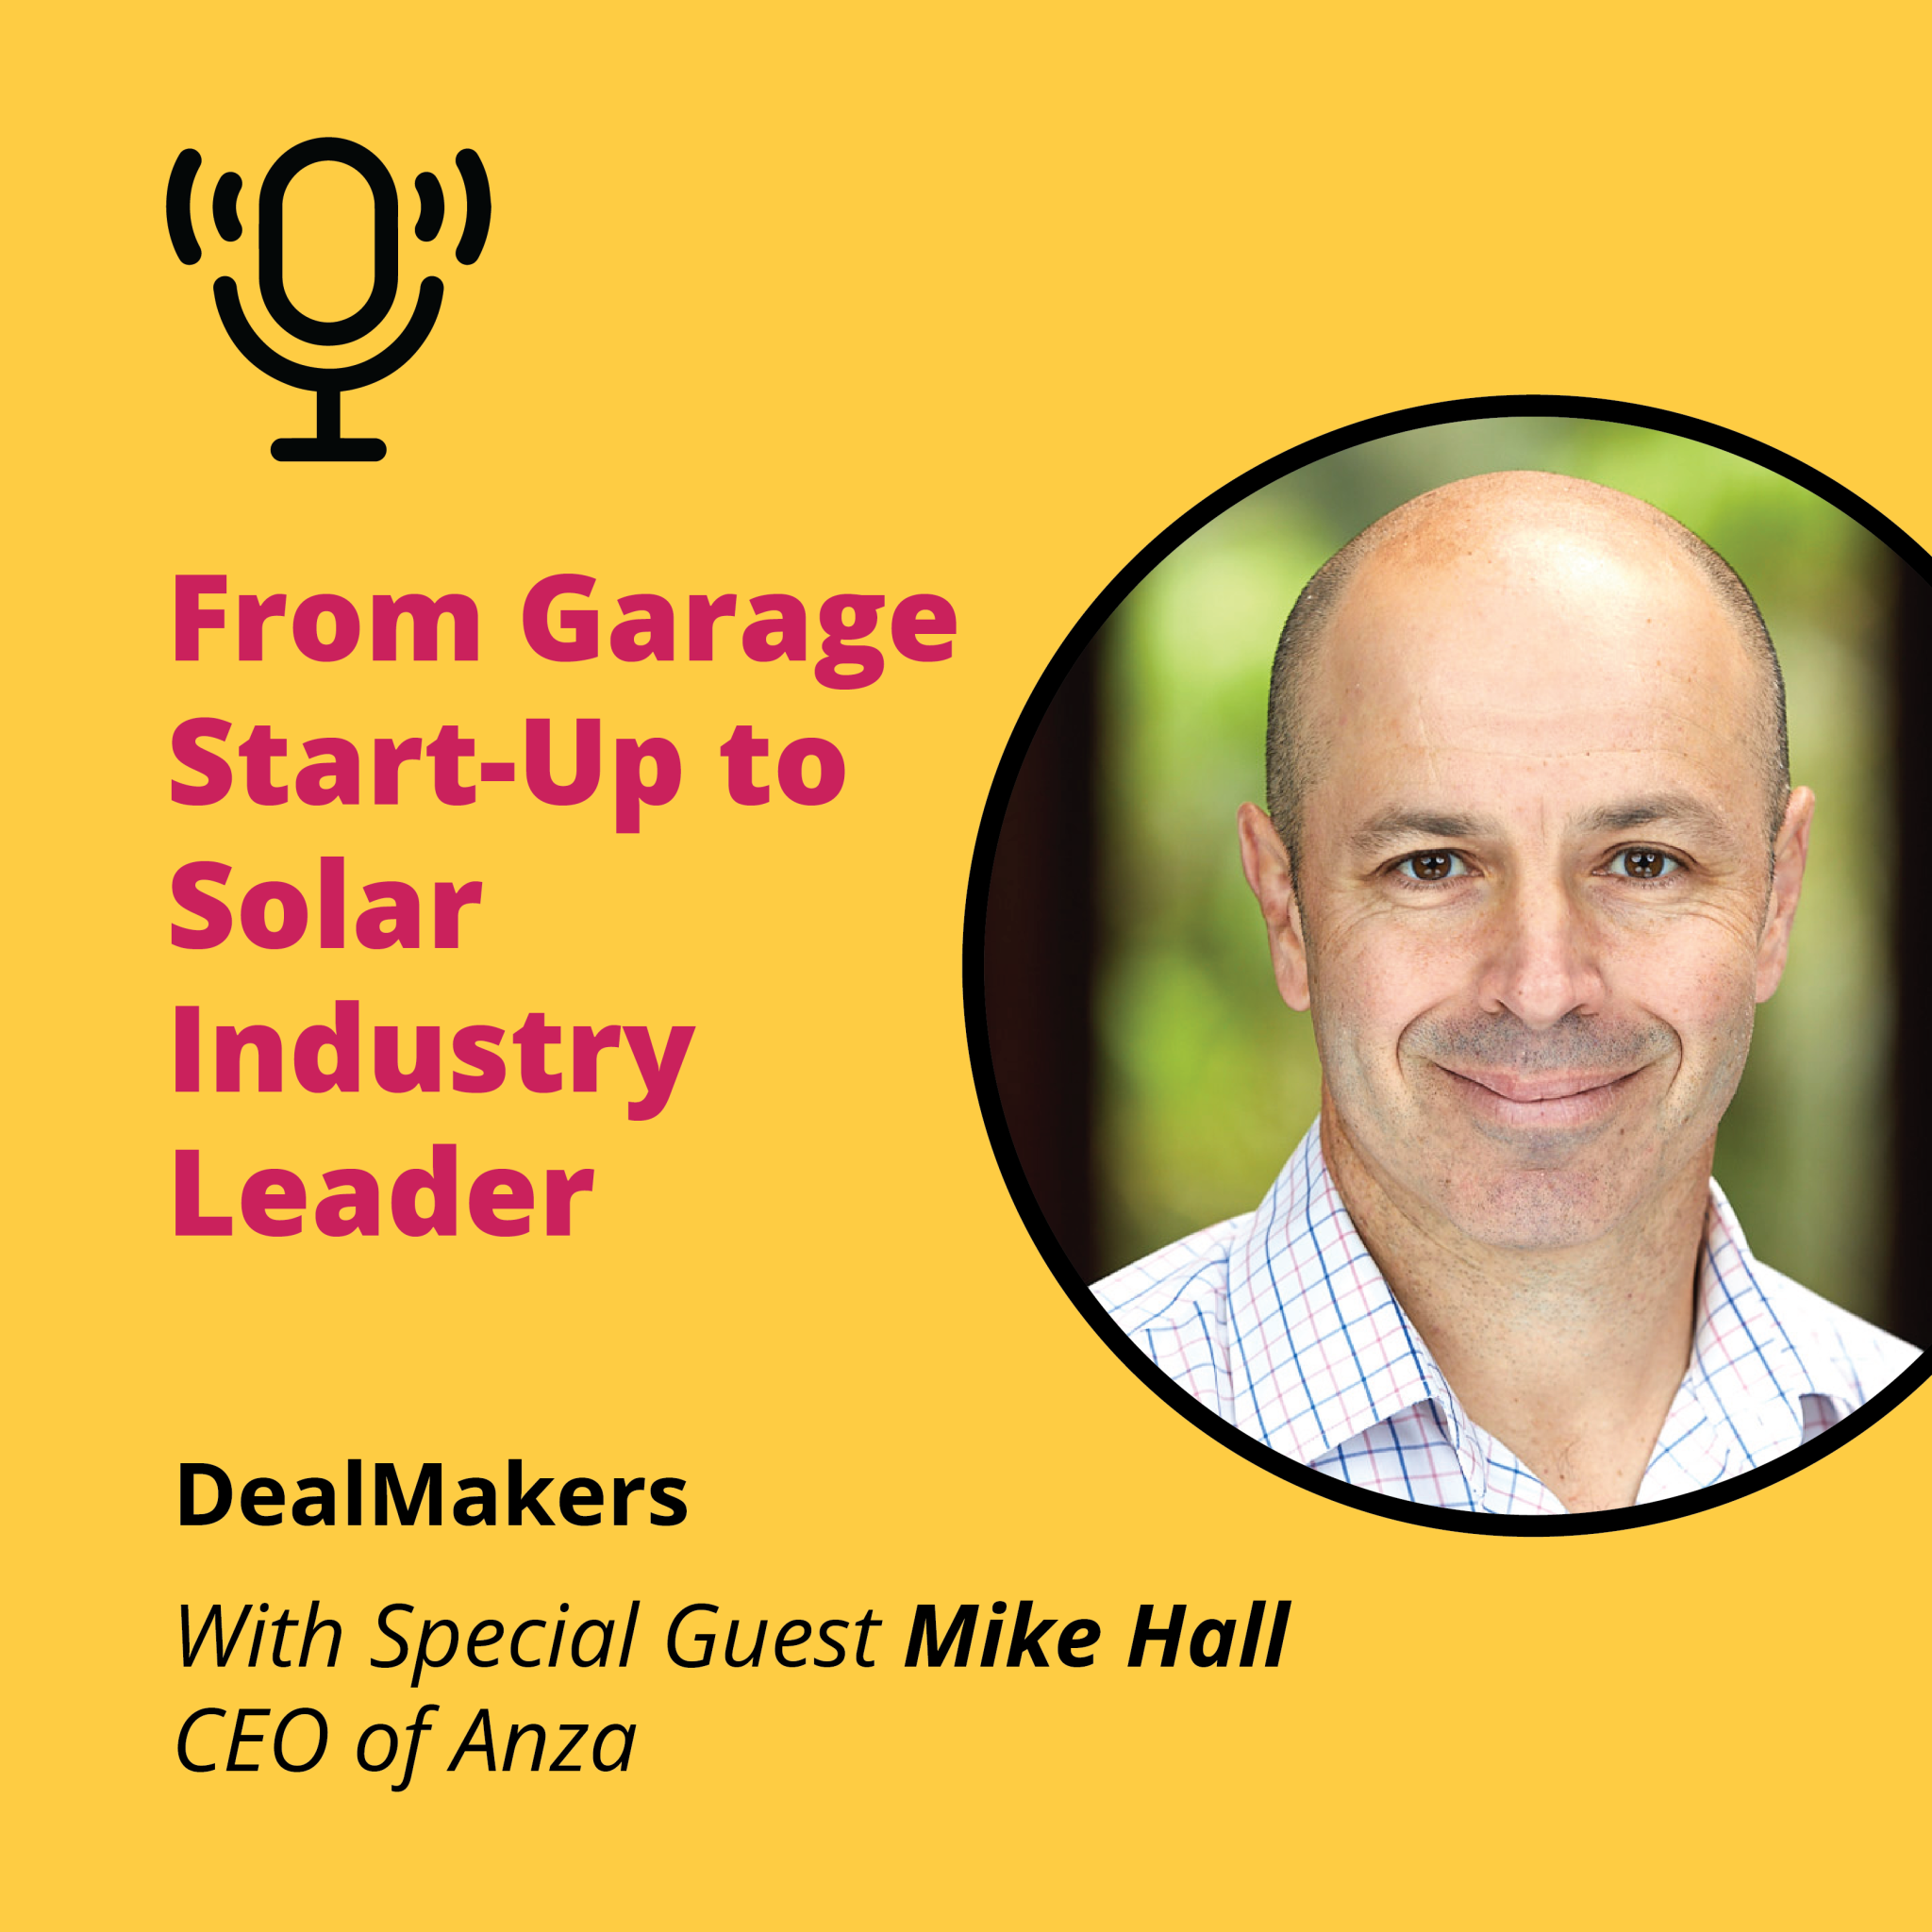 Mike Hall on DealMakers: From Garage Start-Up to Solar Industry Leader